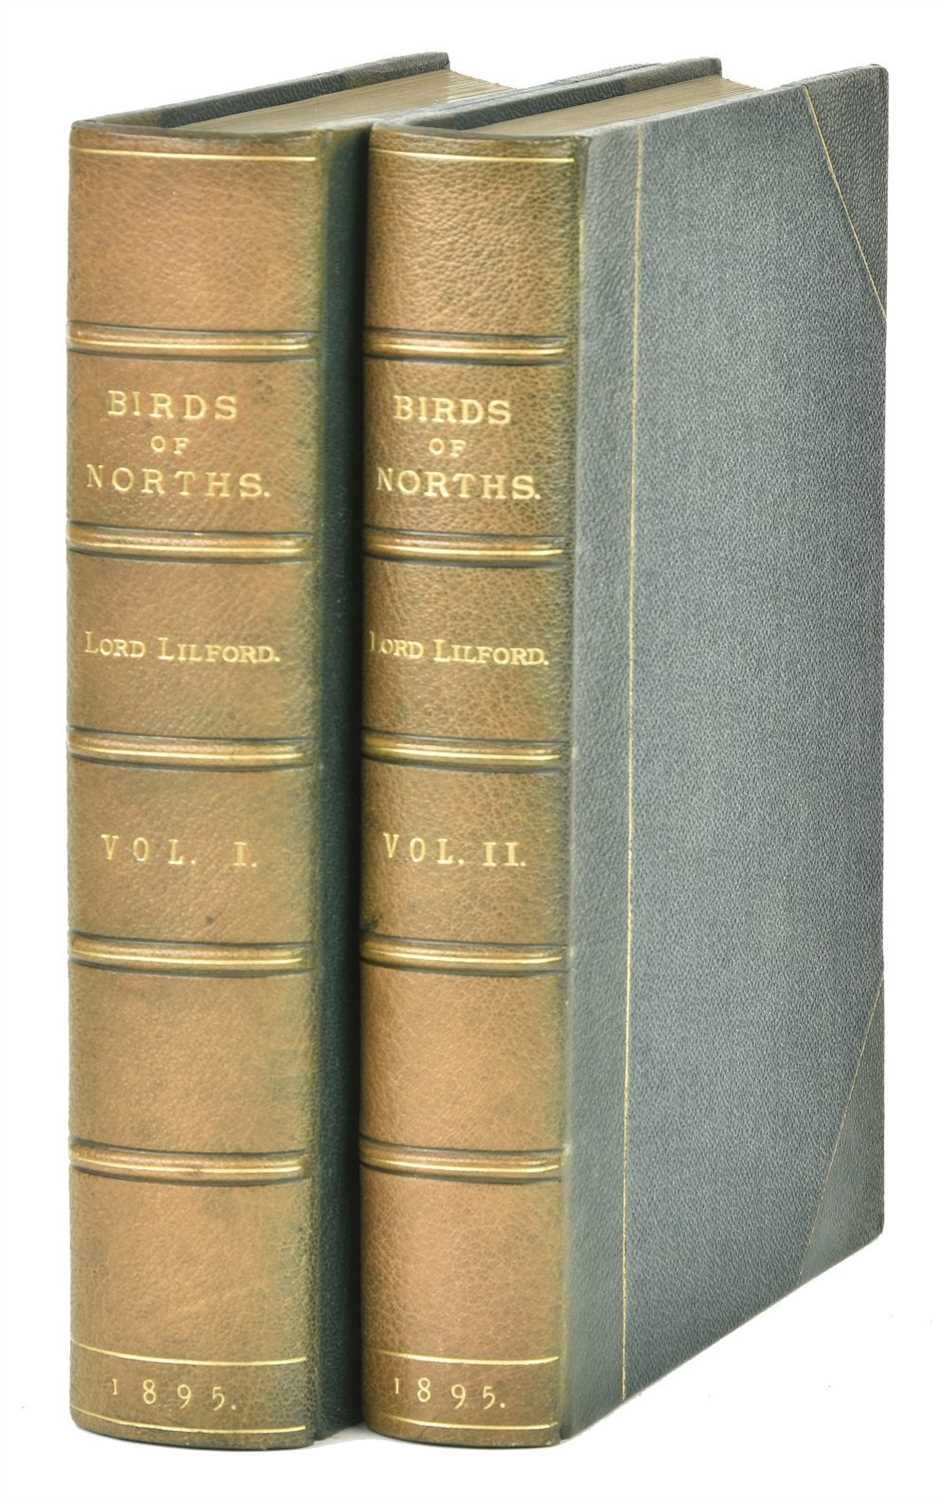 Lot 250 - Lilford (Lord). Notes on the Birds of Northamptonshire, 1st edition, large-paper issue, 1895